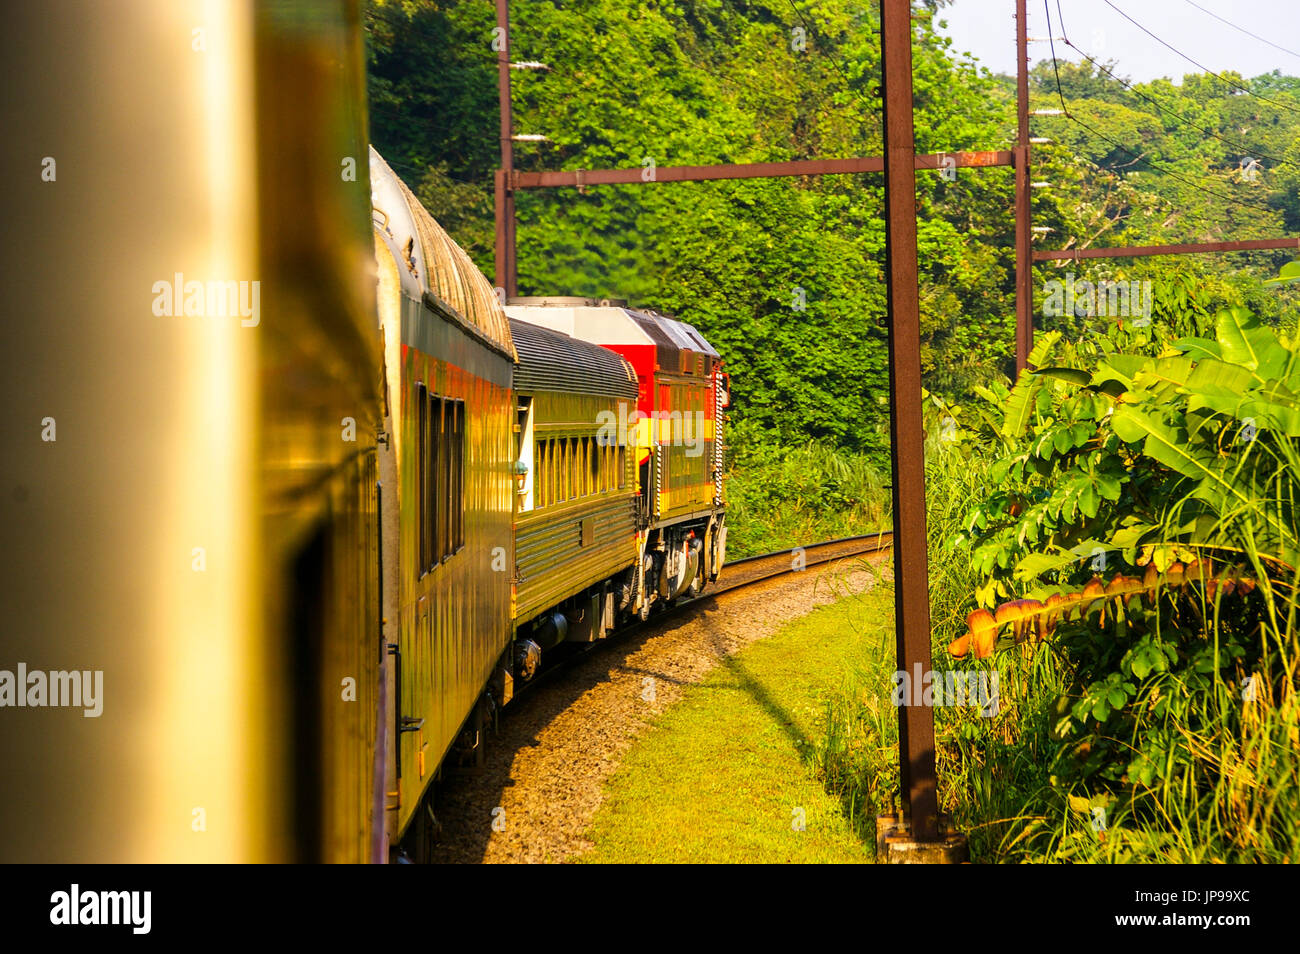 Views of the panama canal railway train in the rainforest traveling from Panama City to Colon Stock Photo